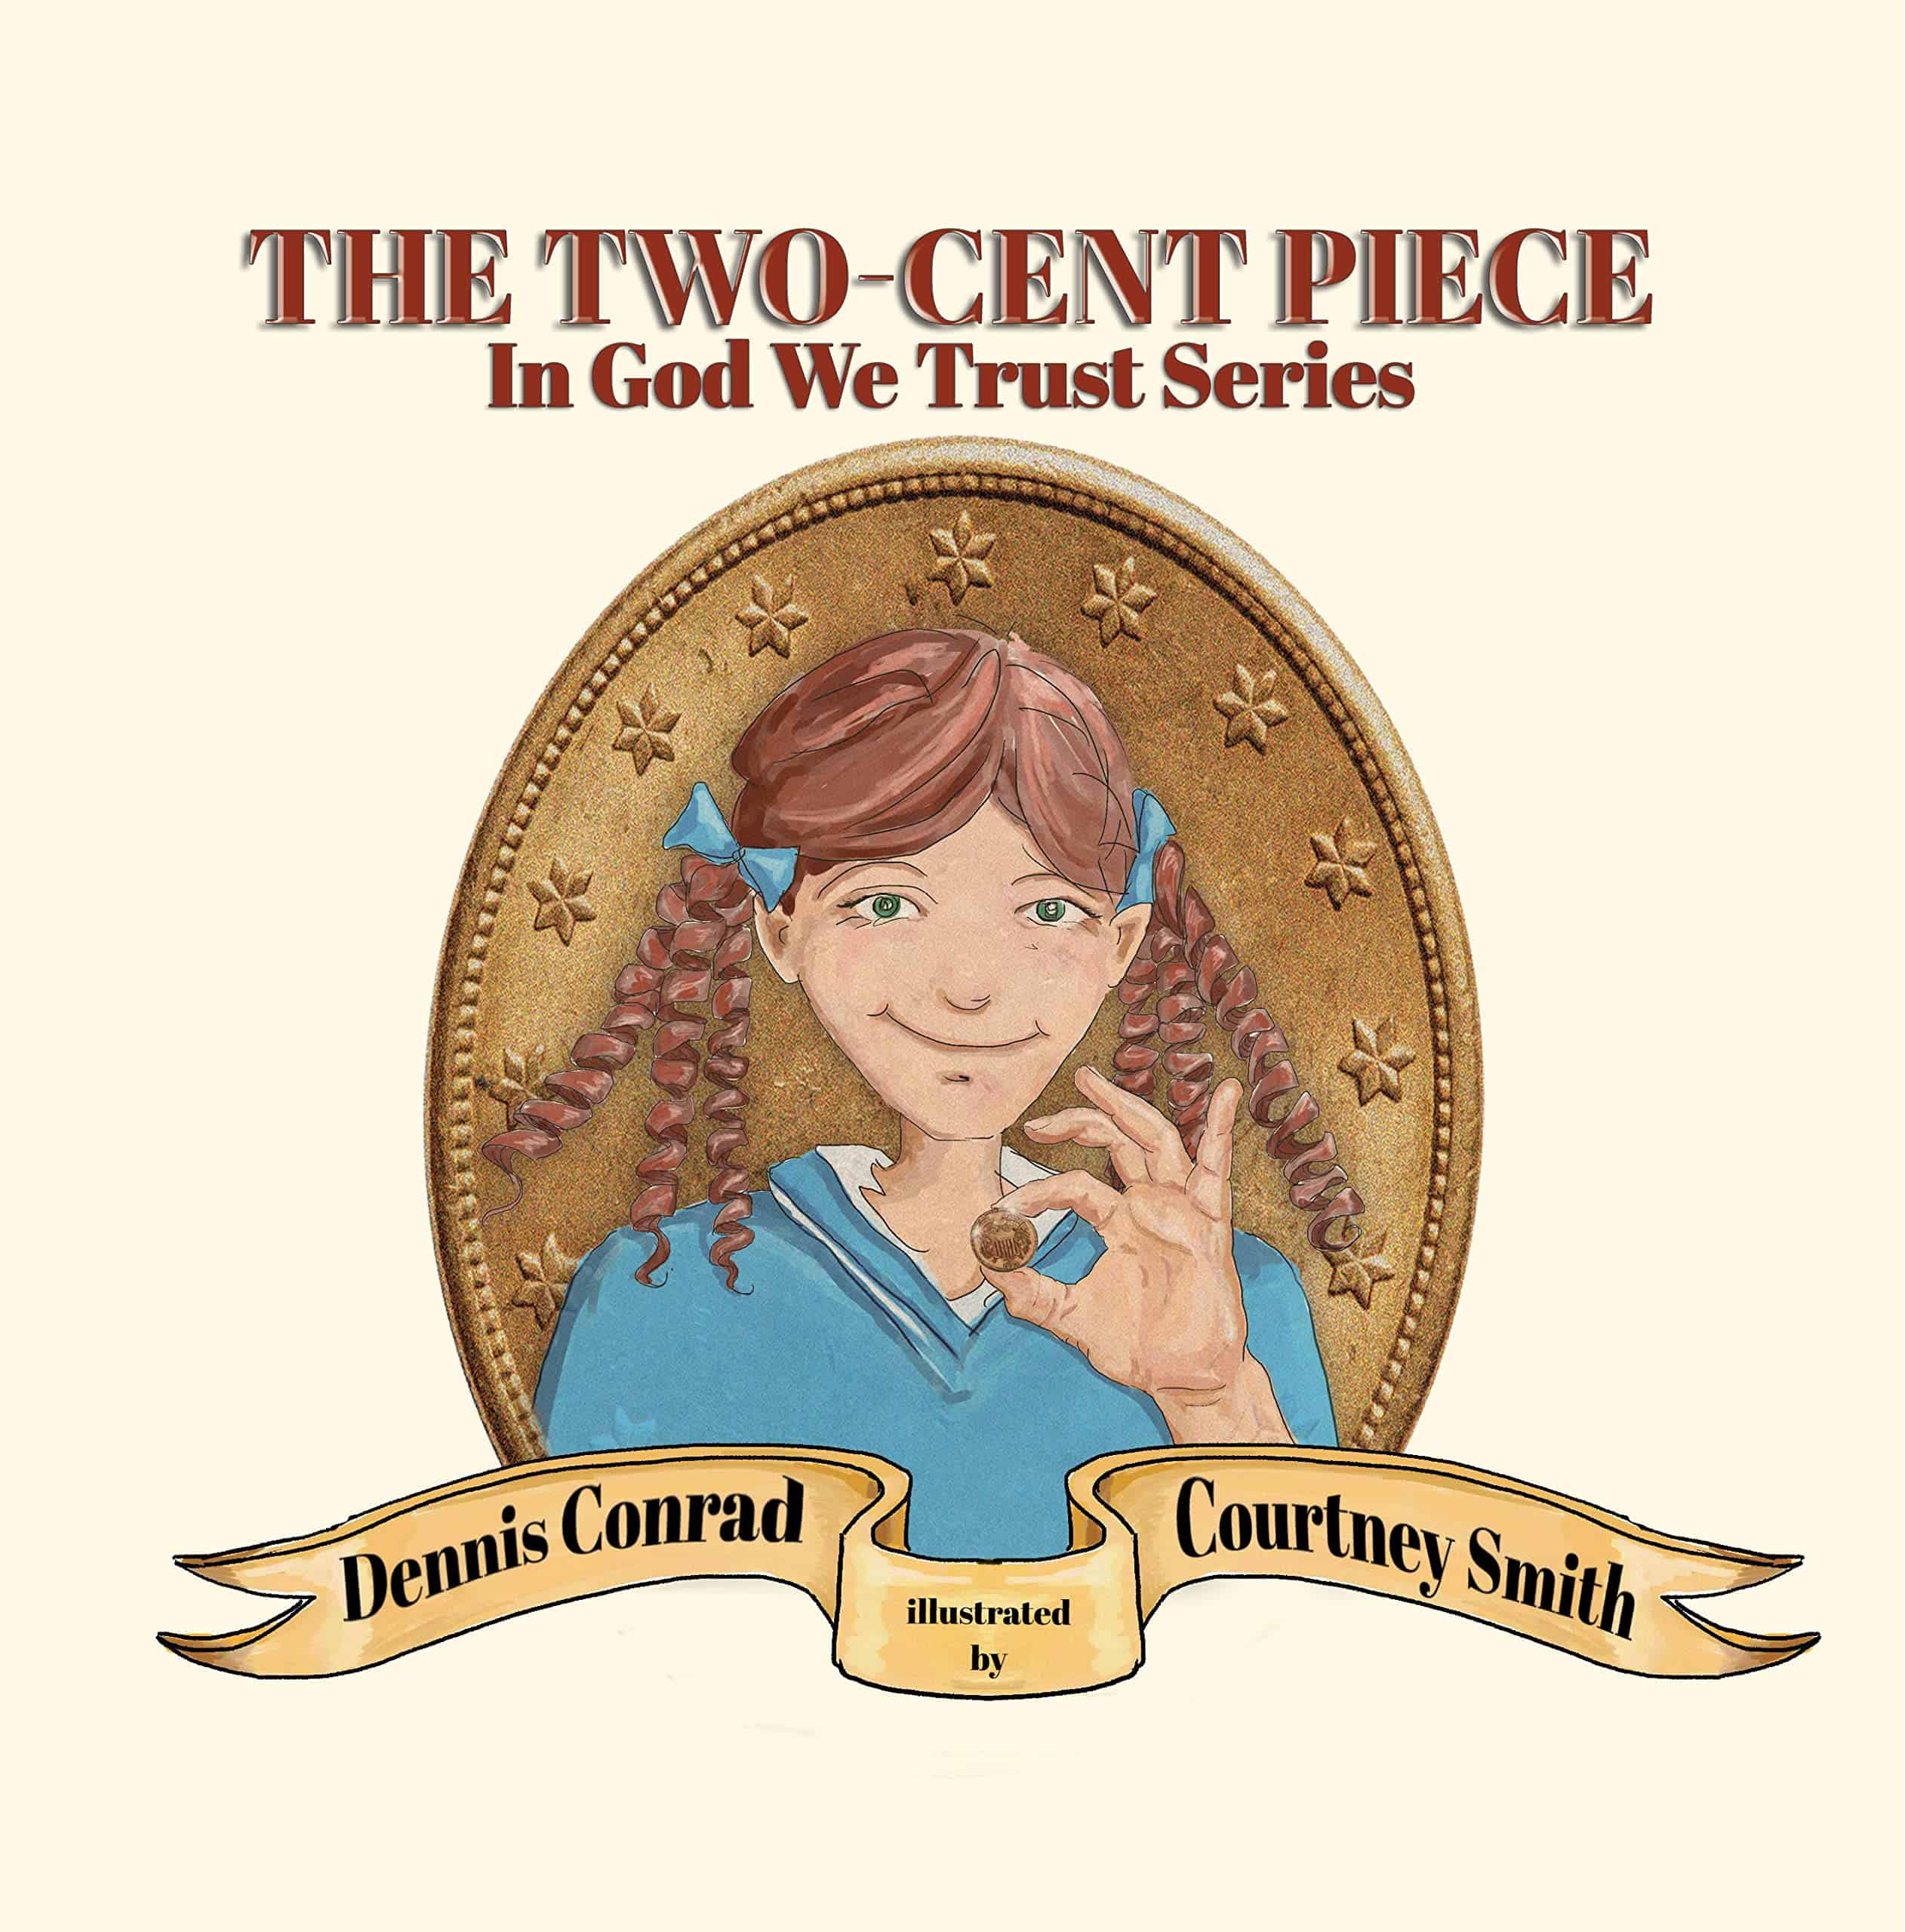 The Two-Cent Piece by Dennis Conrad